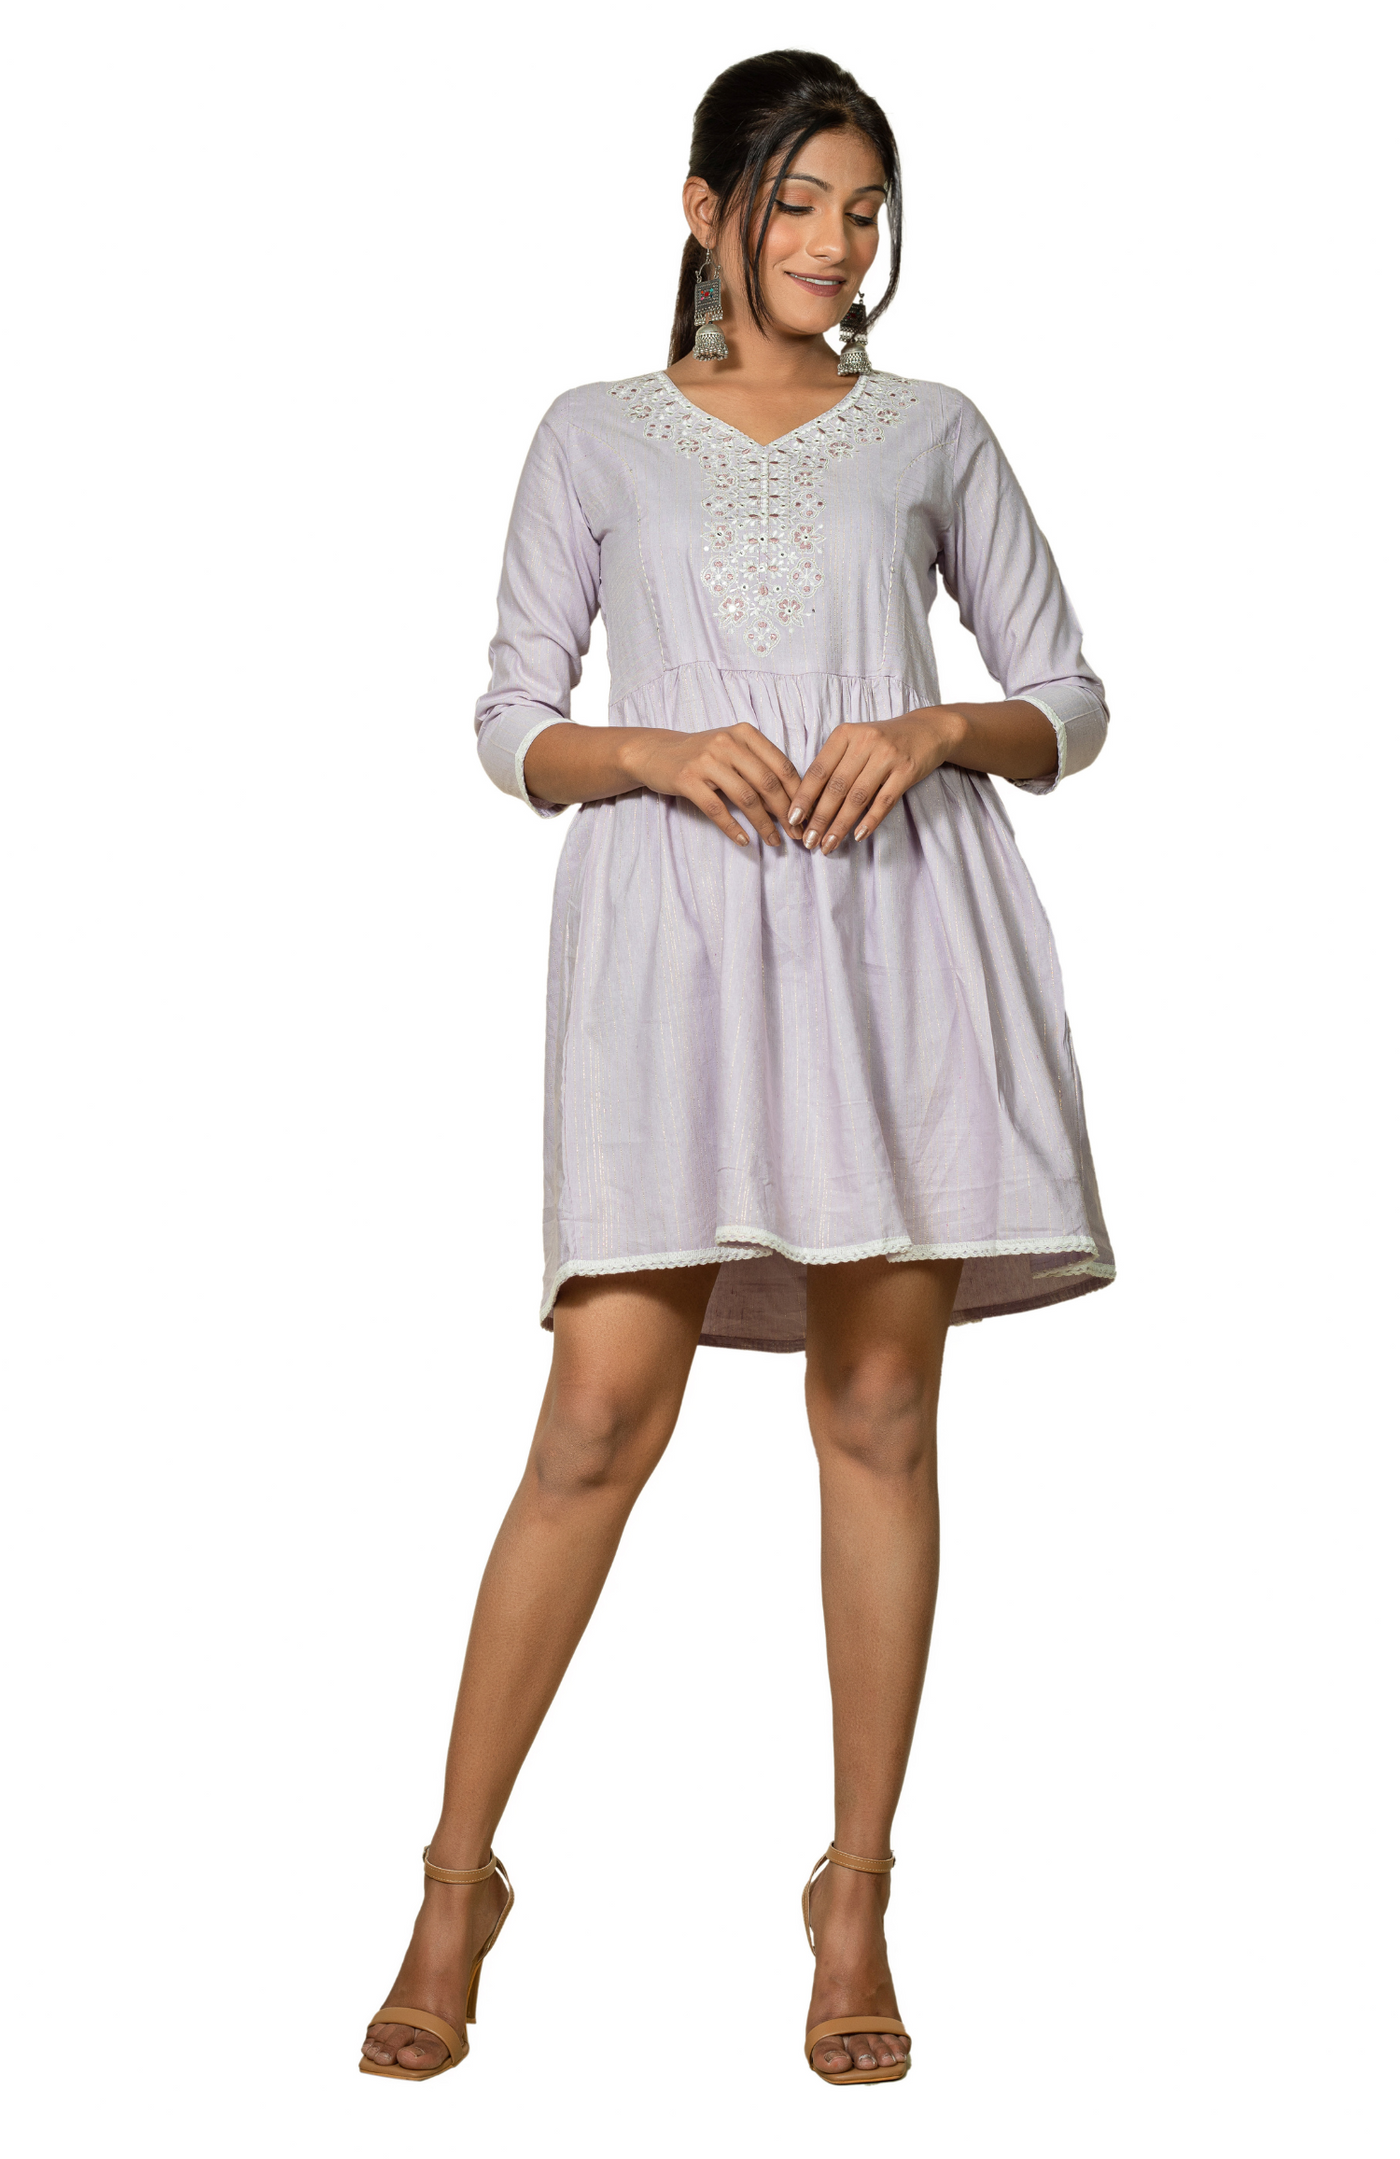 Lilac tunic with White Embroidery Knee Length A-Line Dress